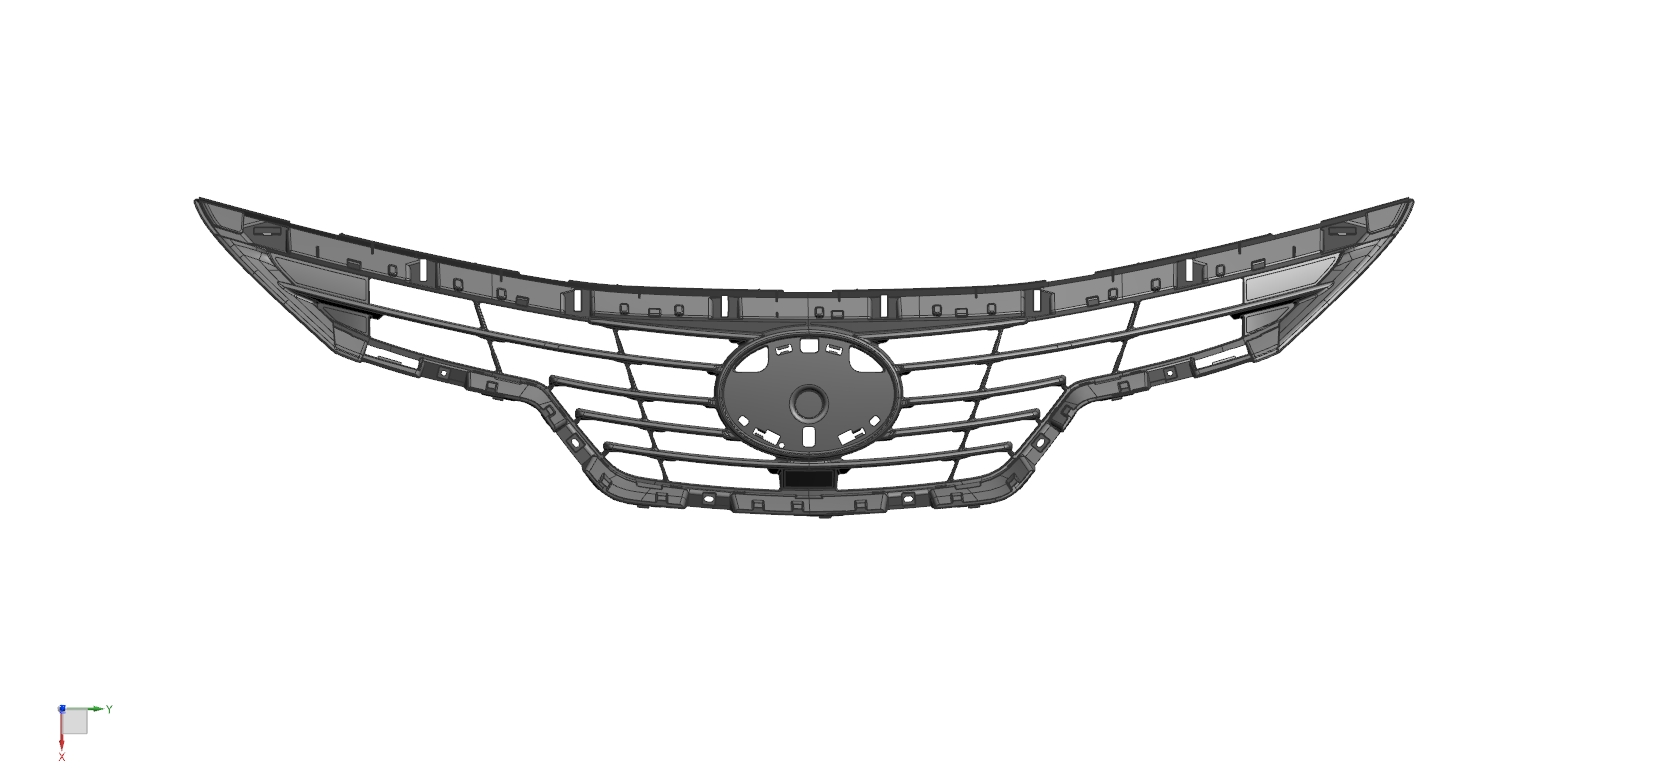 <b>TOYOTA Grille injection mould</b>